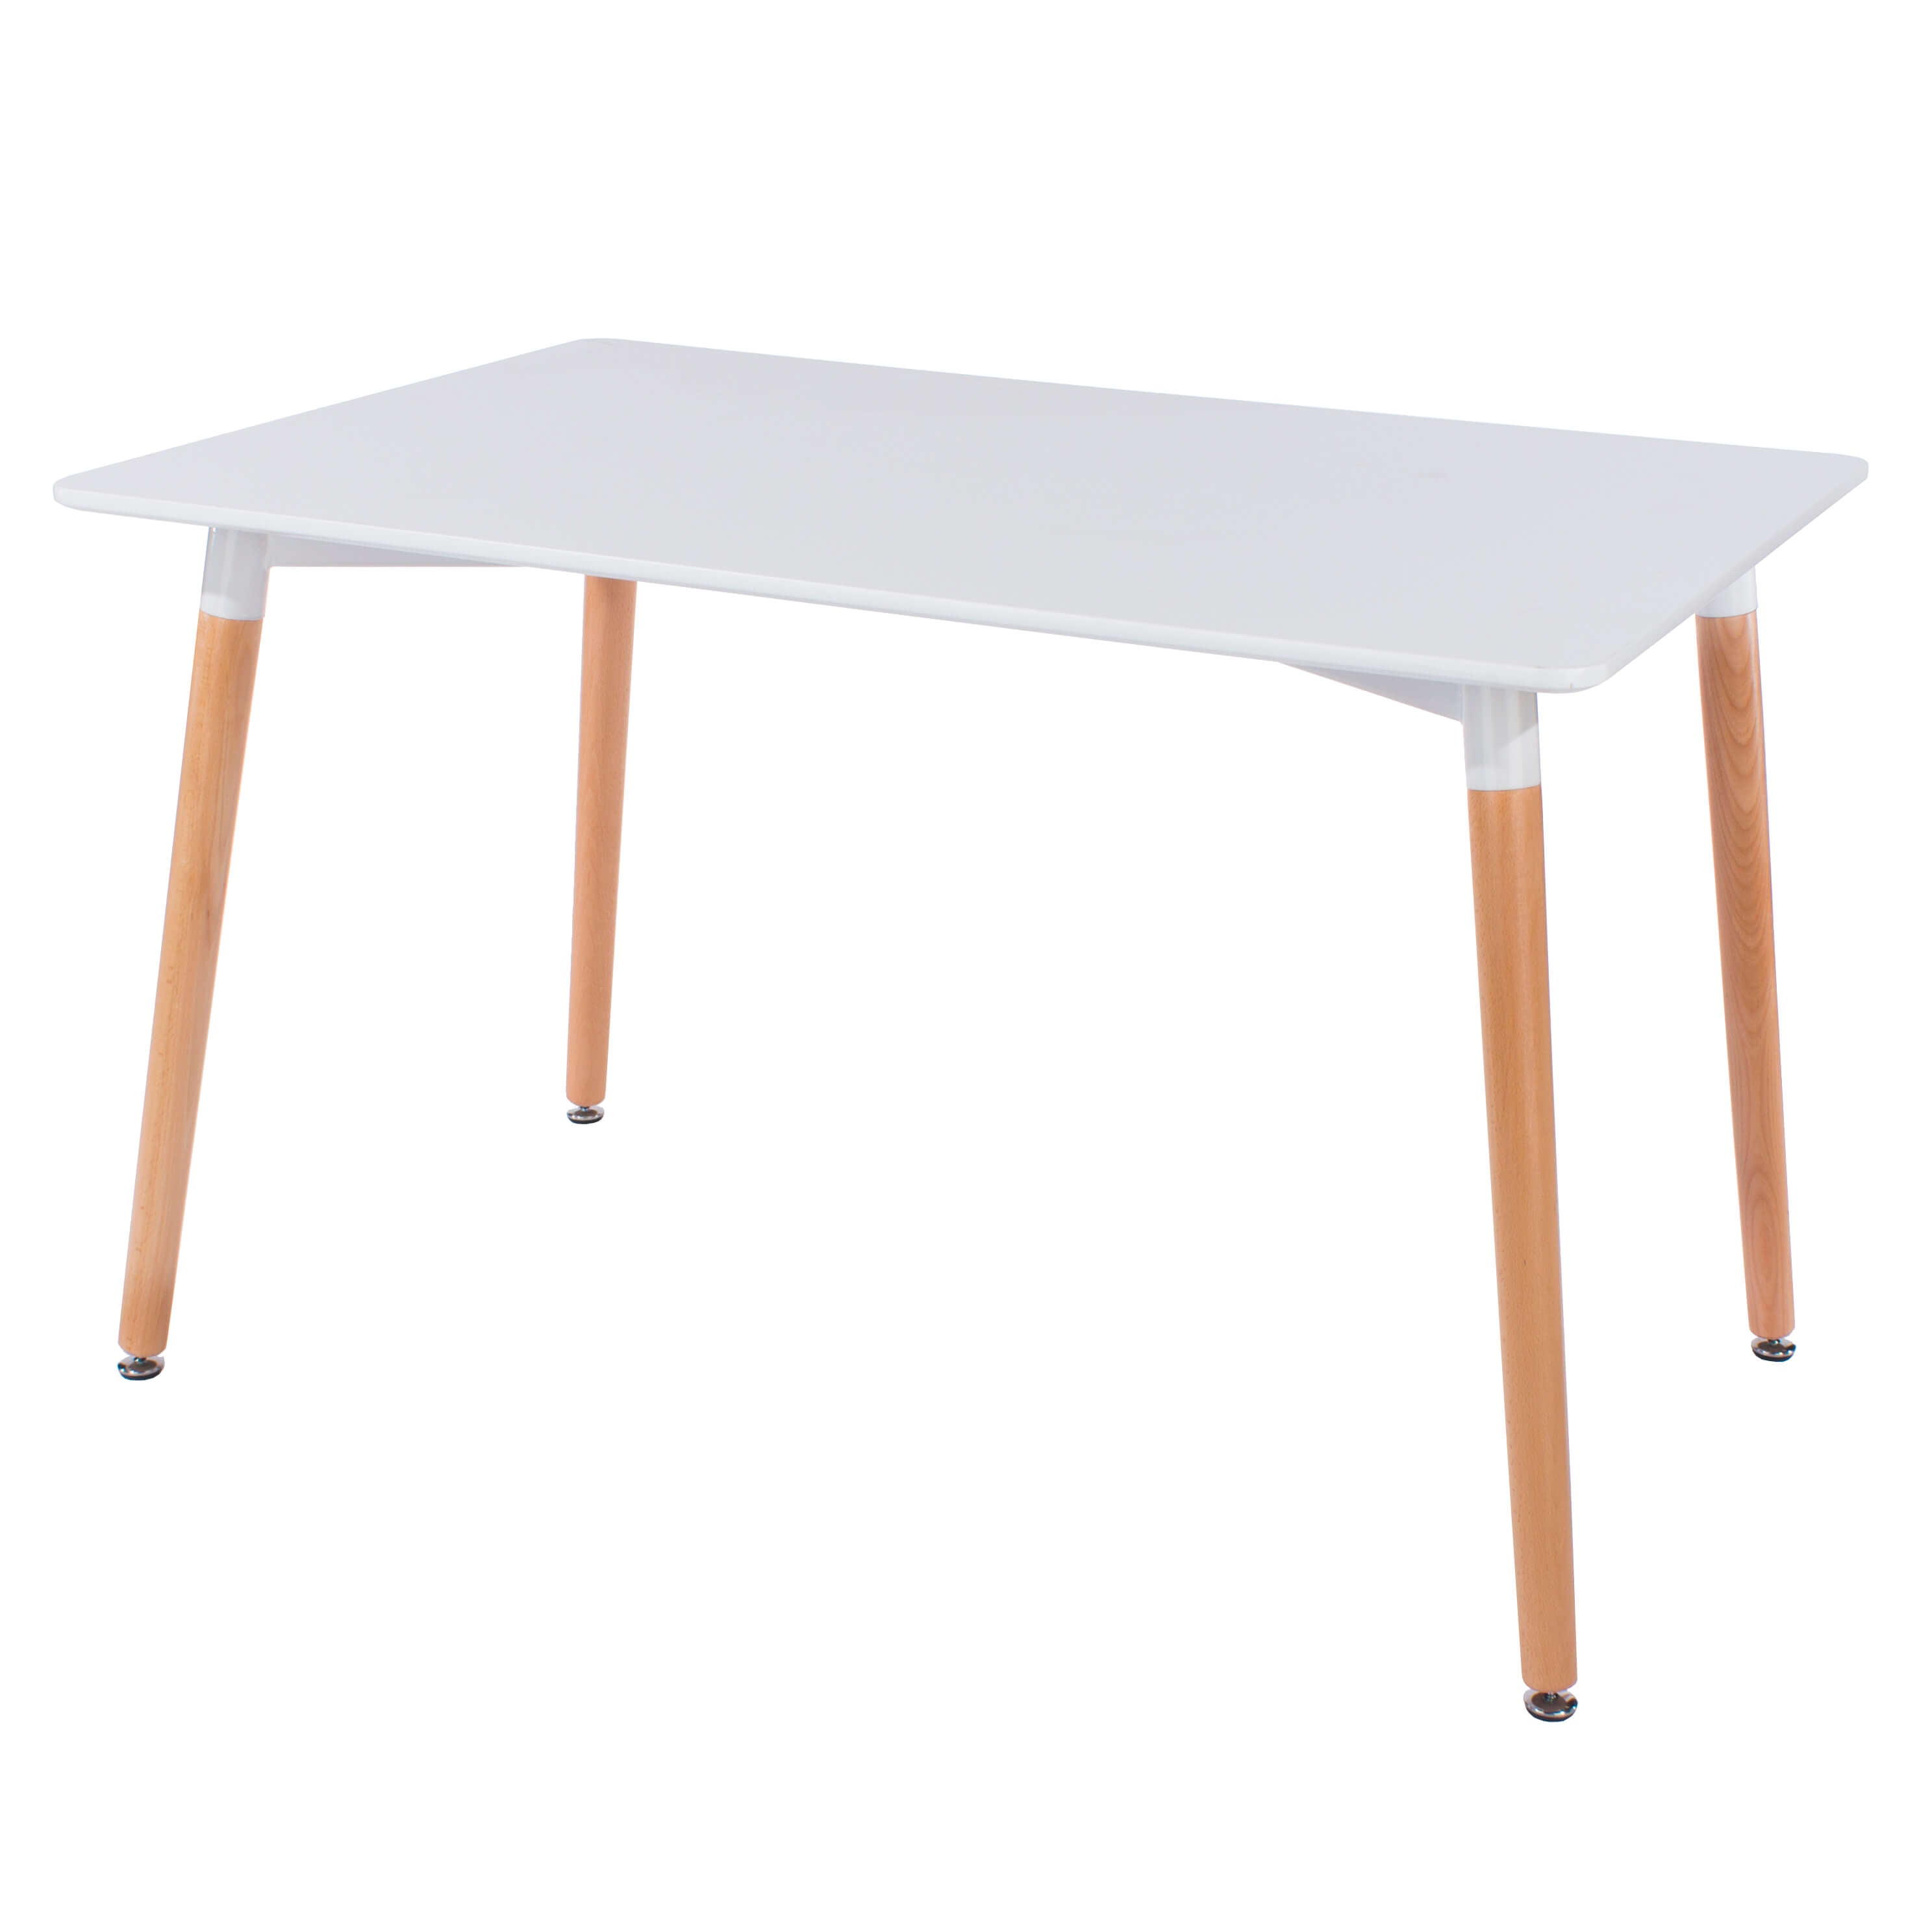 4 Seater Dining Table-White (TABLE ONLY) Home Office Garden | HOG-HomeOfficeGarden | HOG-Home.Office.Garden